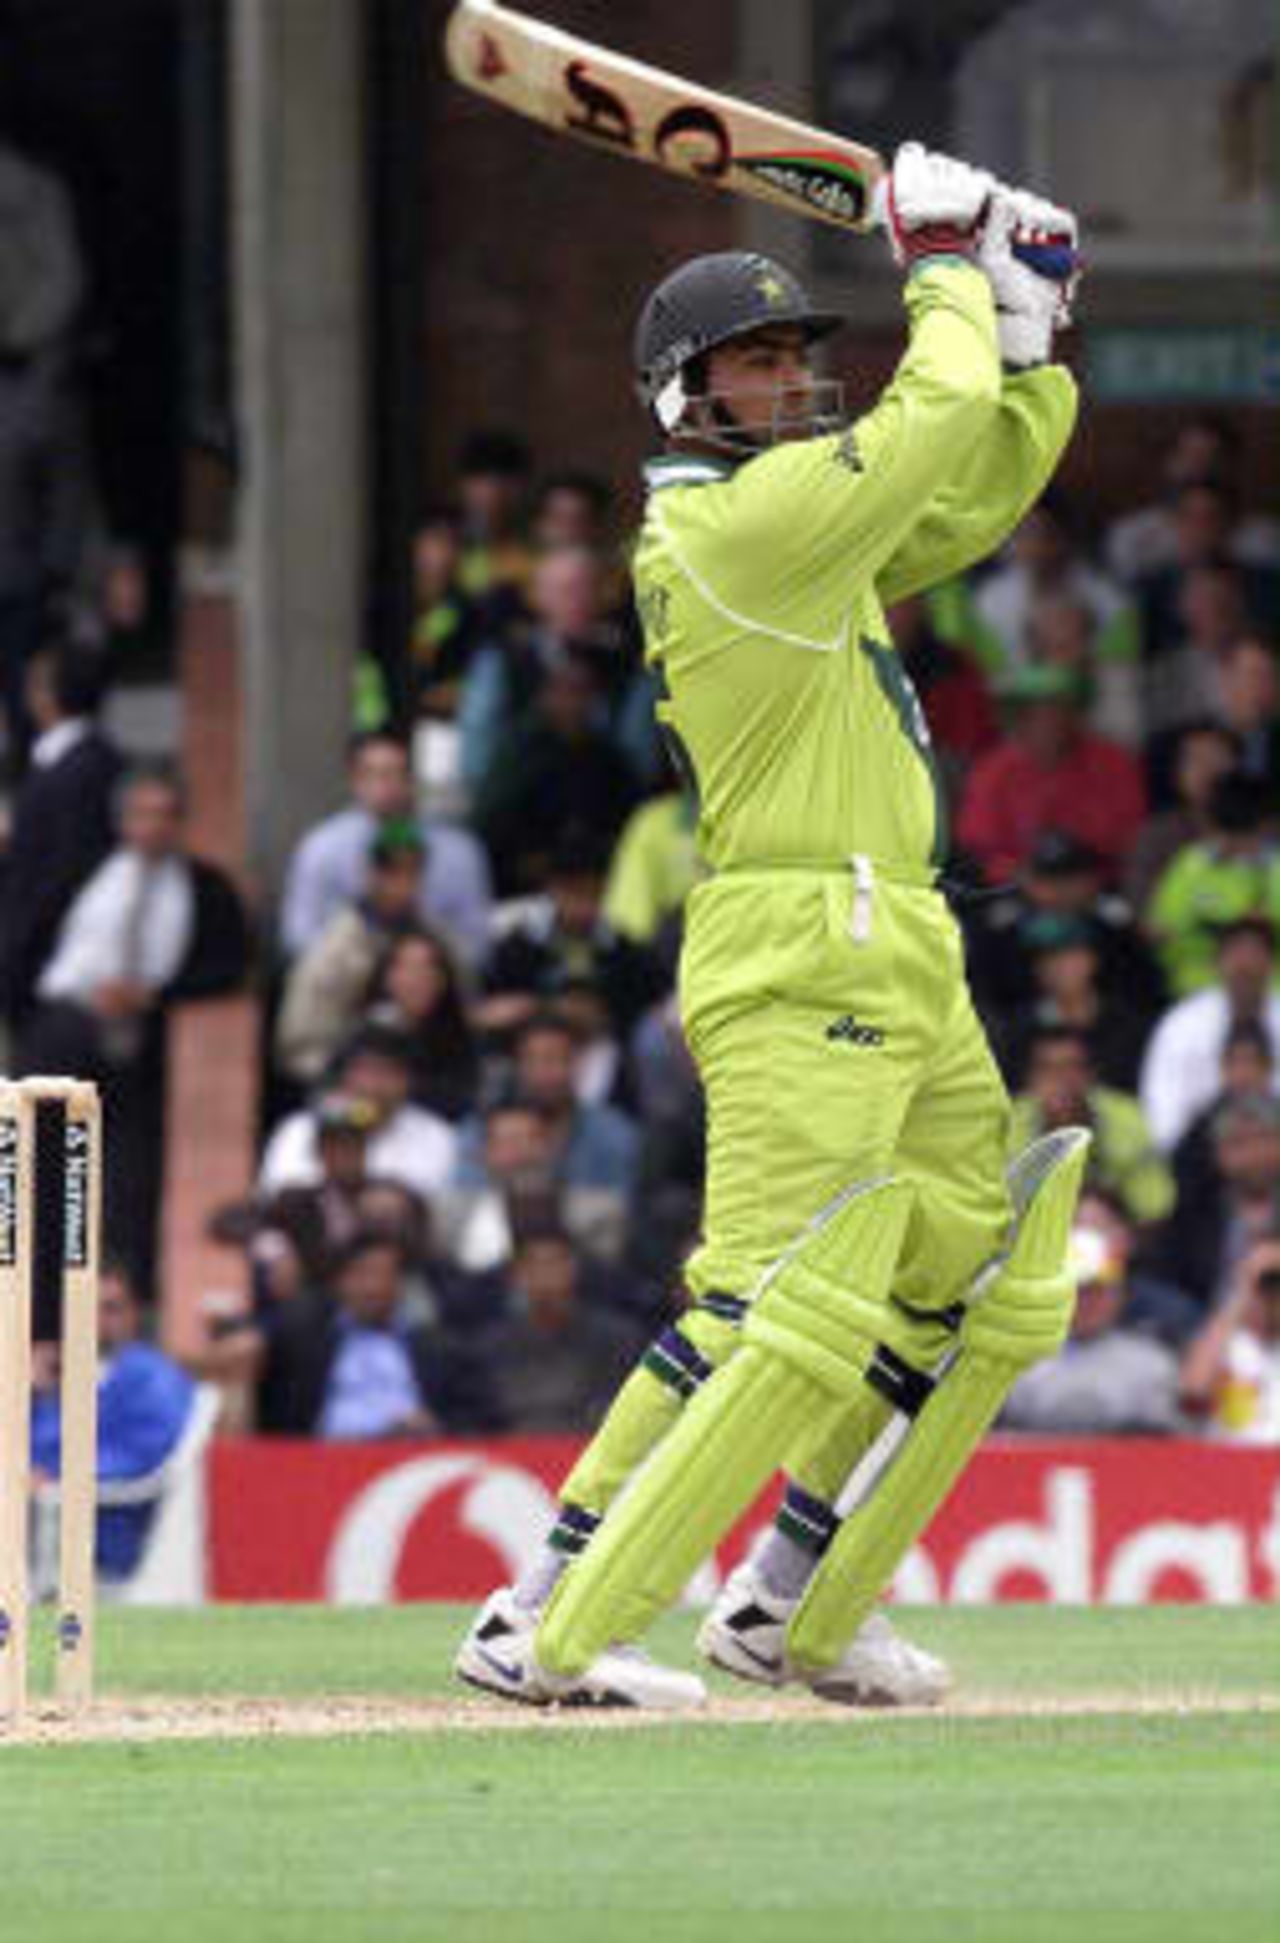 Pakistan's Wajahatullah Wasti is seen in action during the Cricket World Cup match against Zimbabwe at the Oval in London, 11 June 1999.